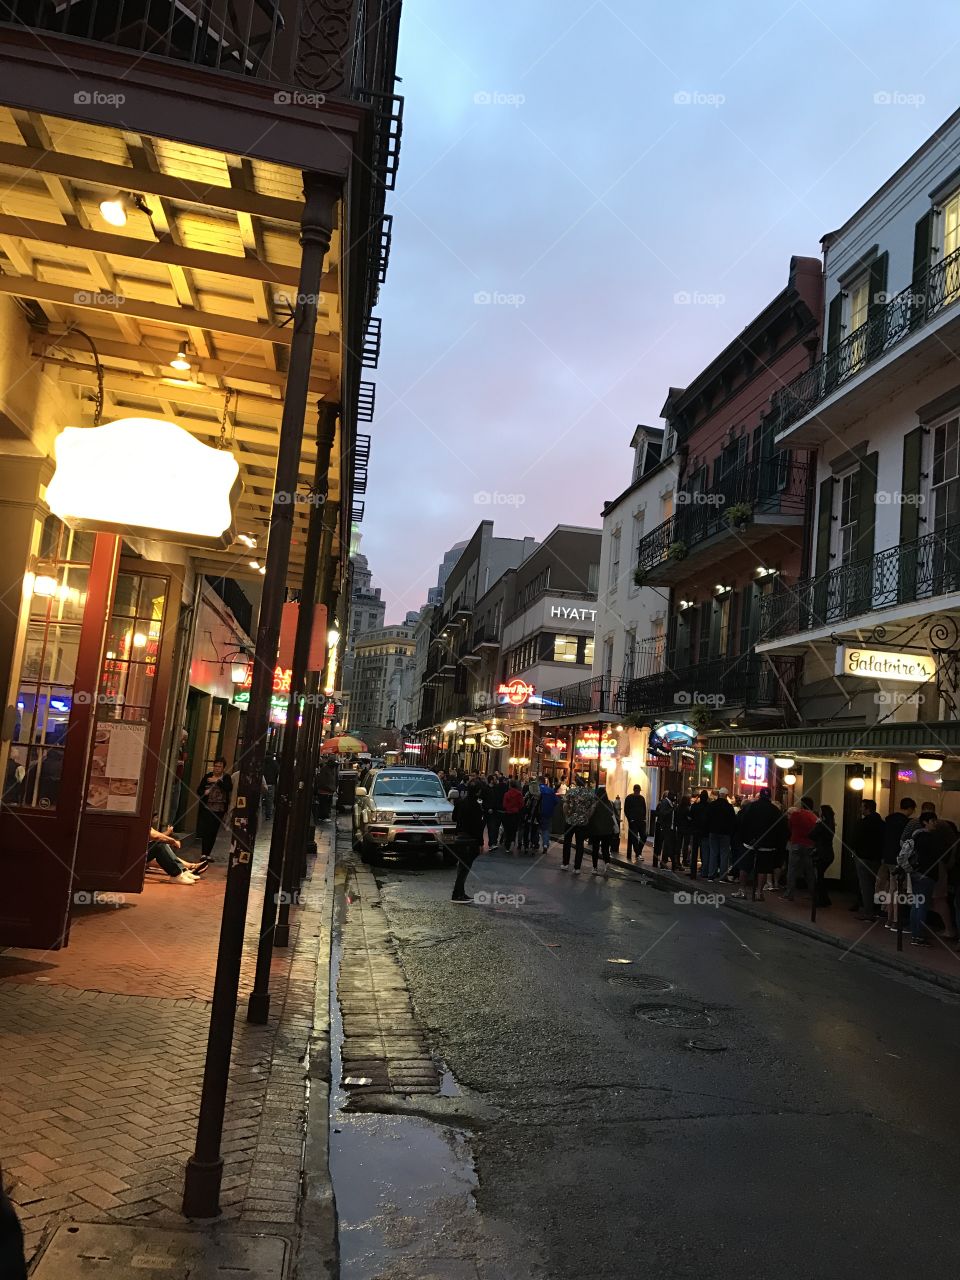 The French quarter 